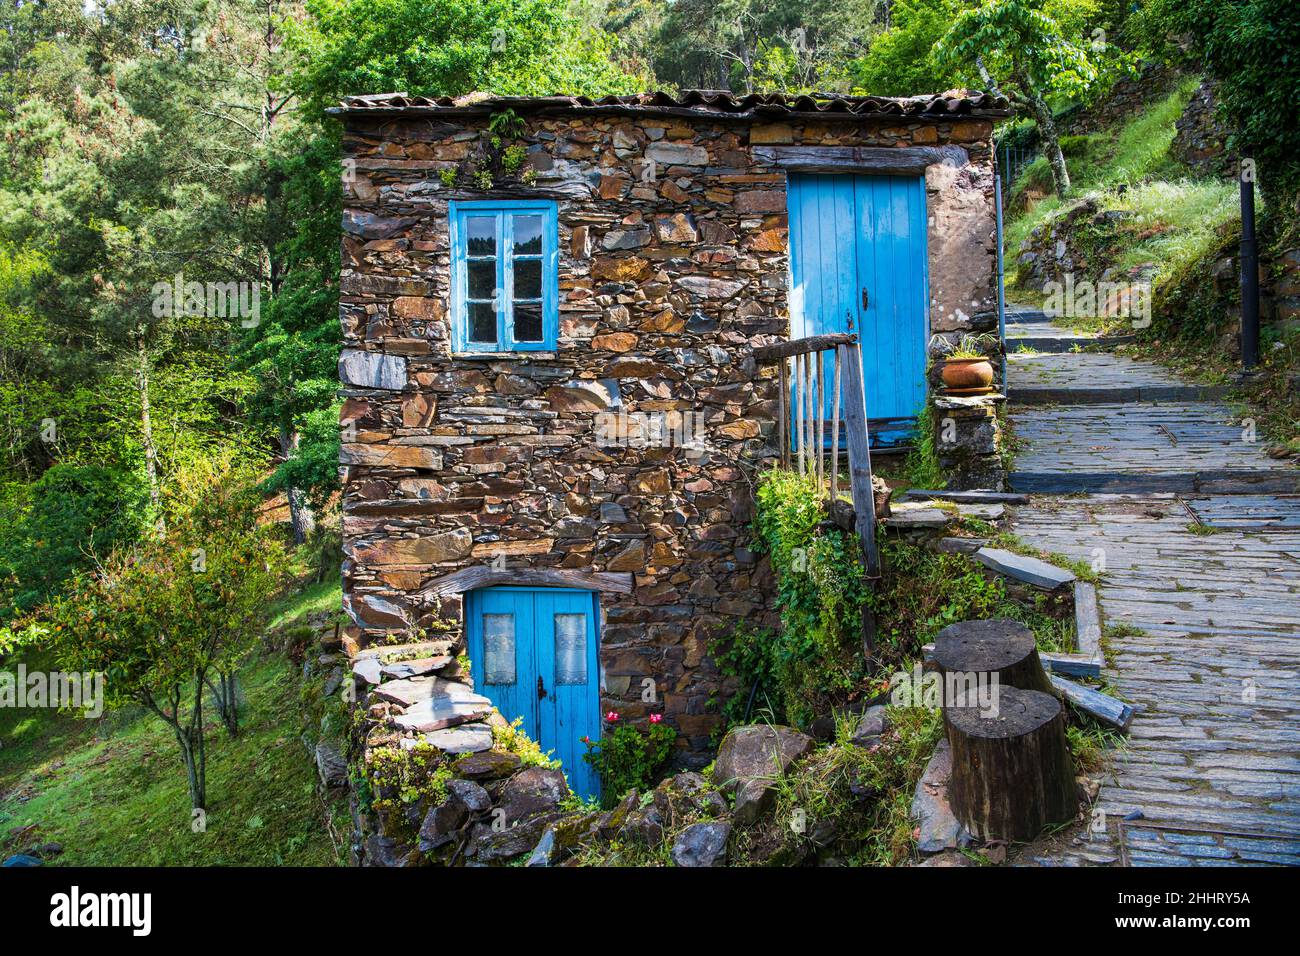 Old stone house with rustic blue wooden doors and windows in the village of Cerdeira, Portugal Stock Photo